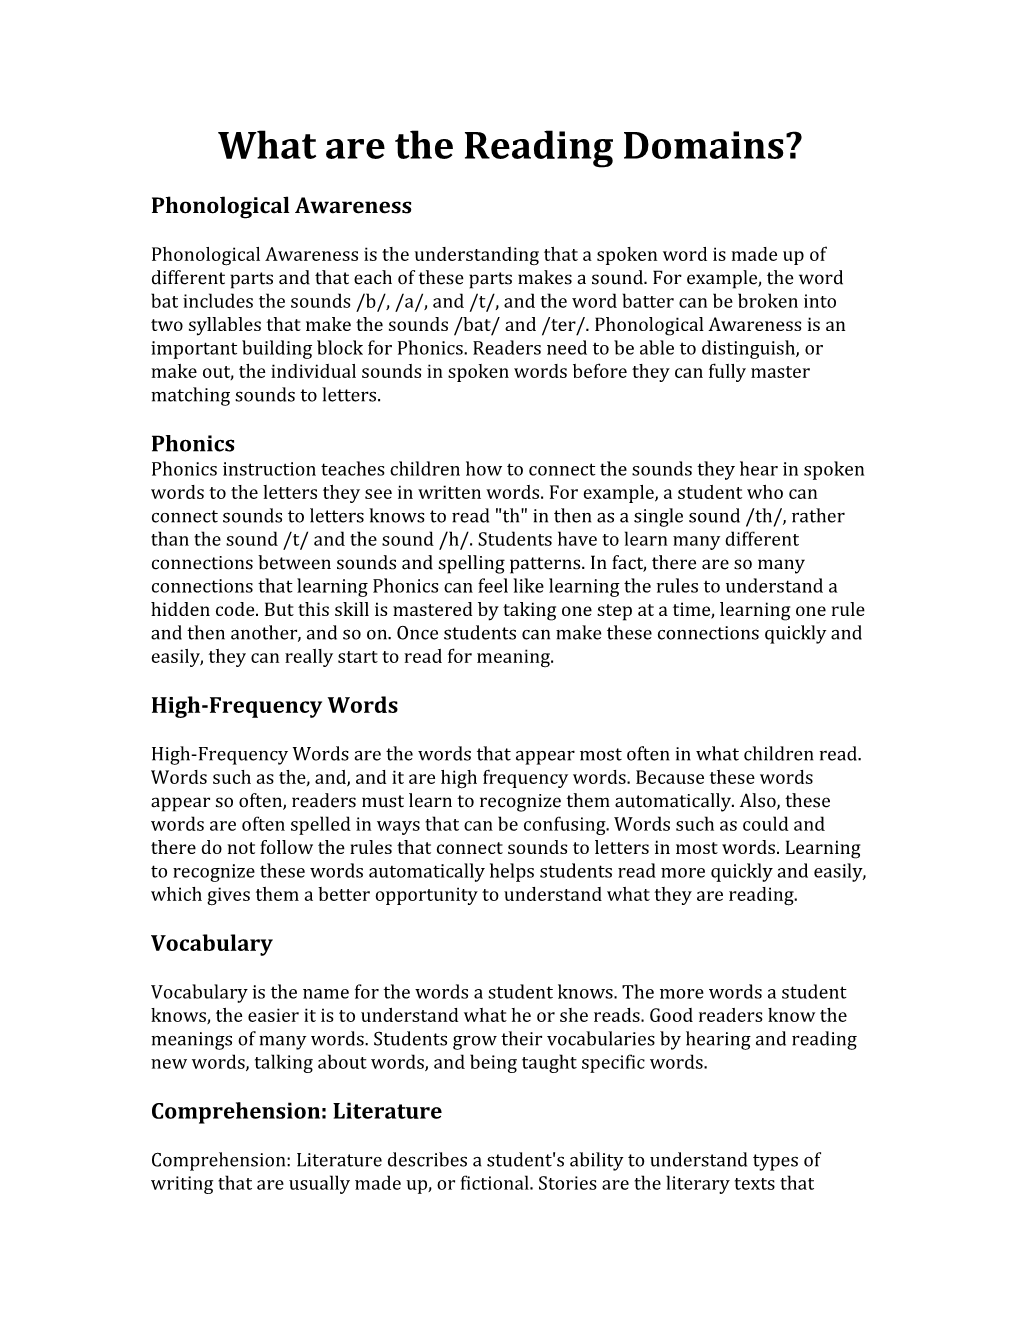 What Are the Reading Domains?